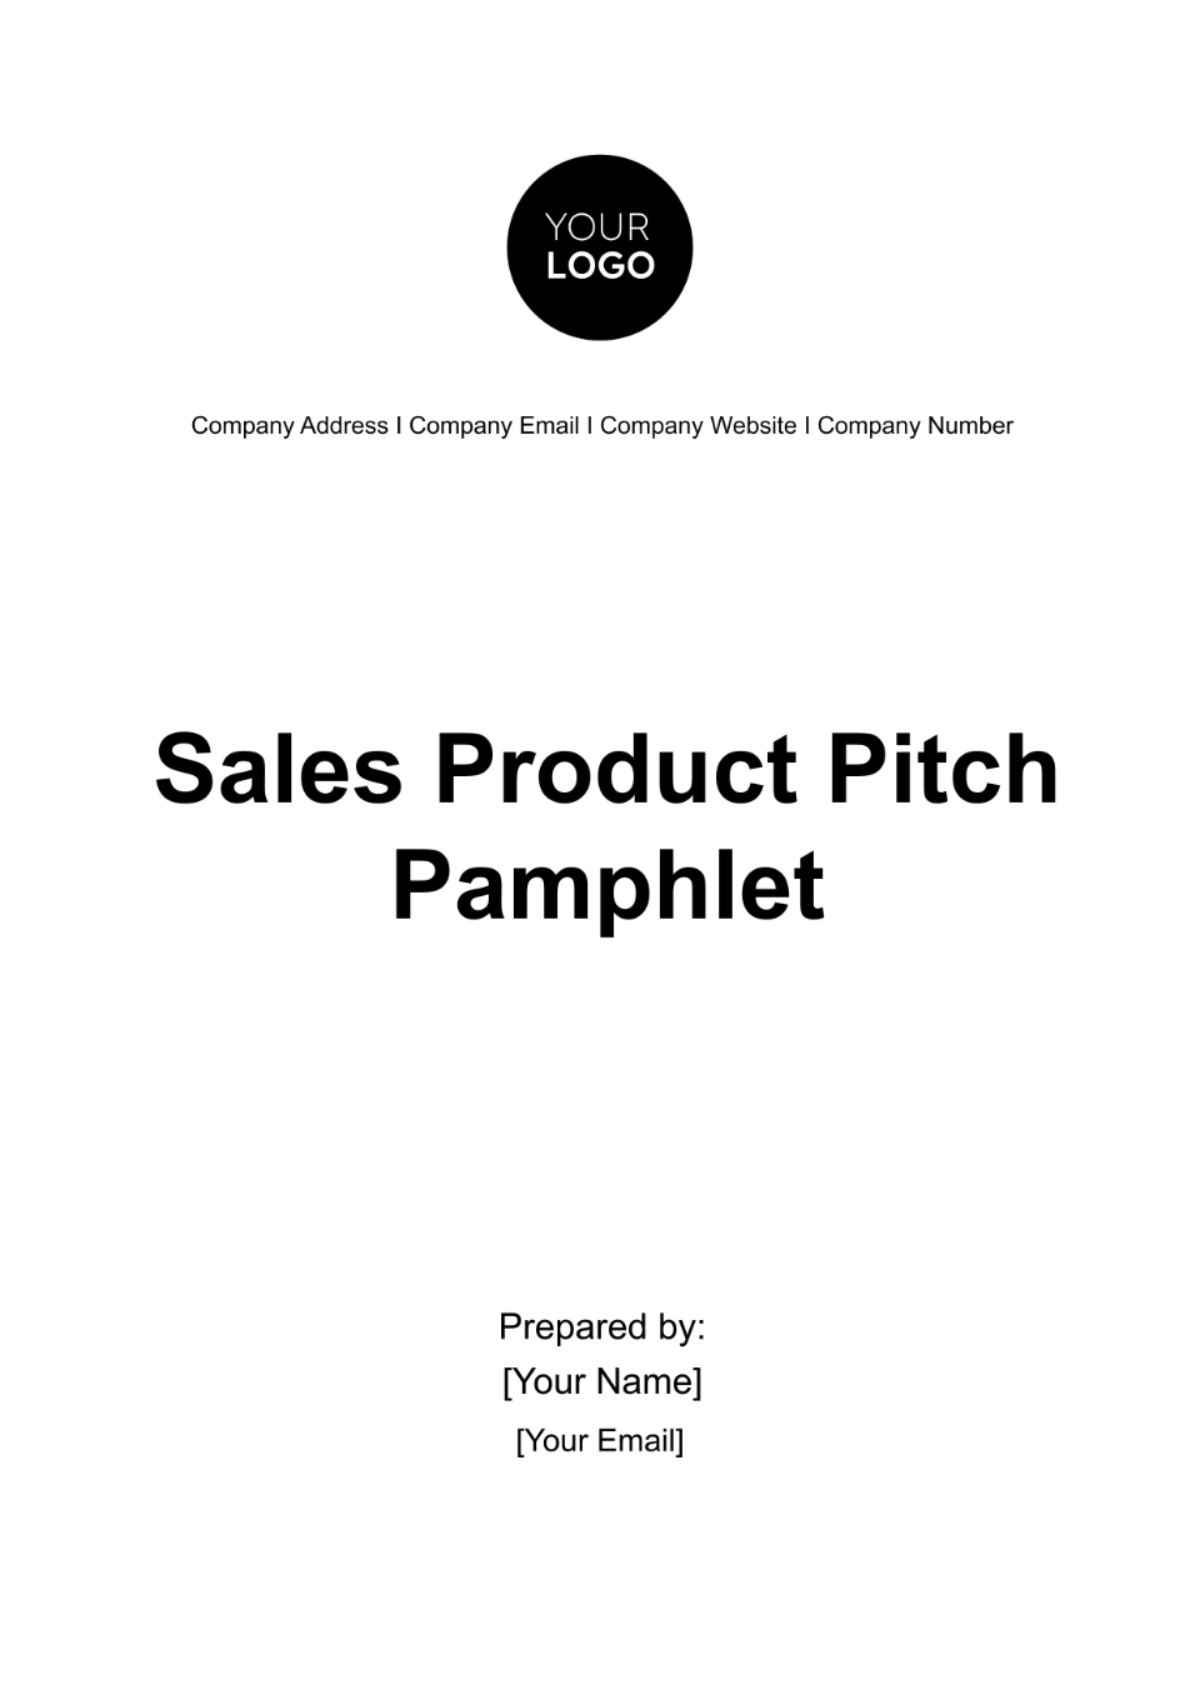 Free Sales Product Pitch Pamphlet Template